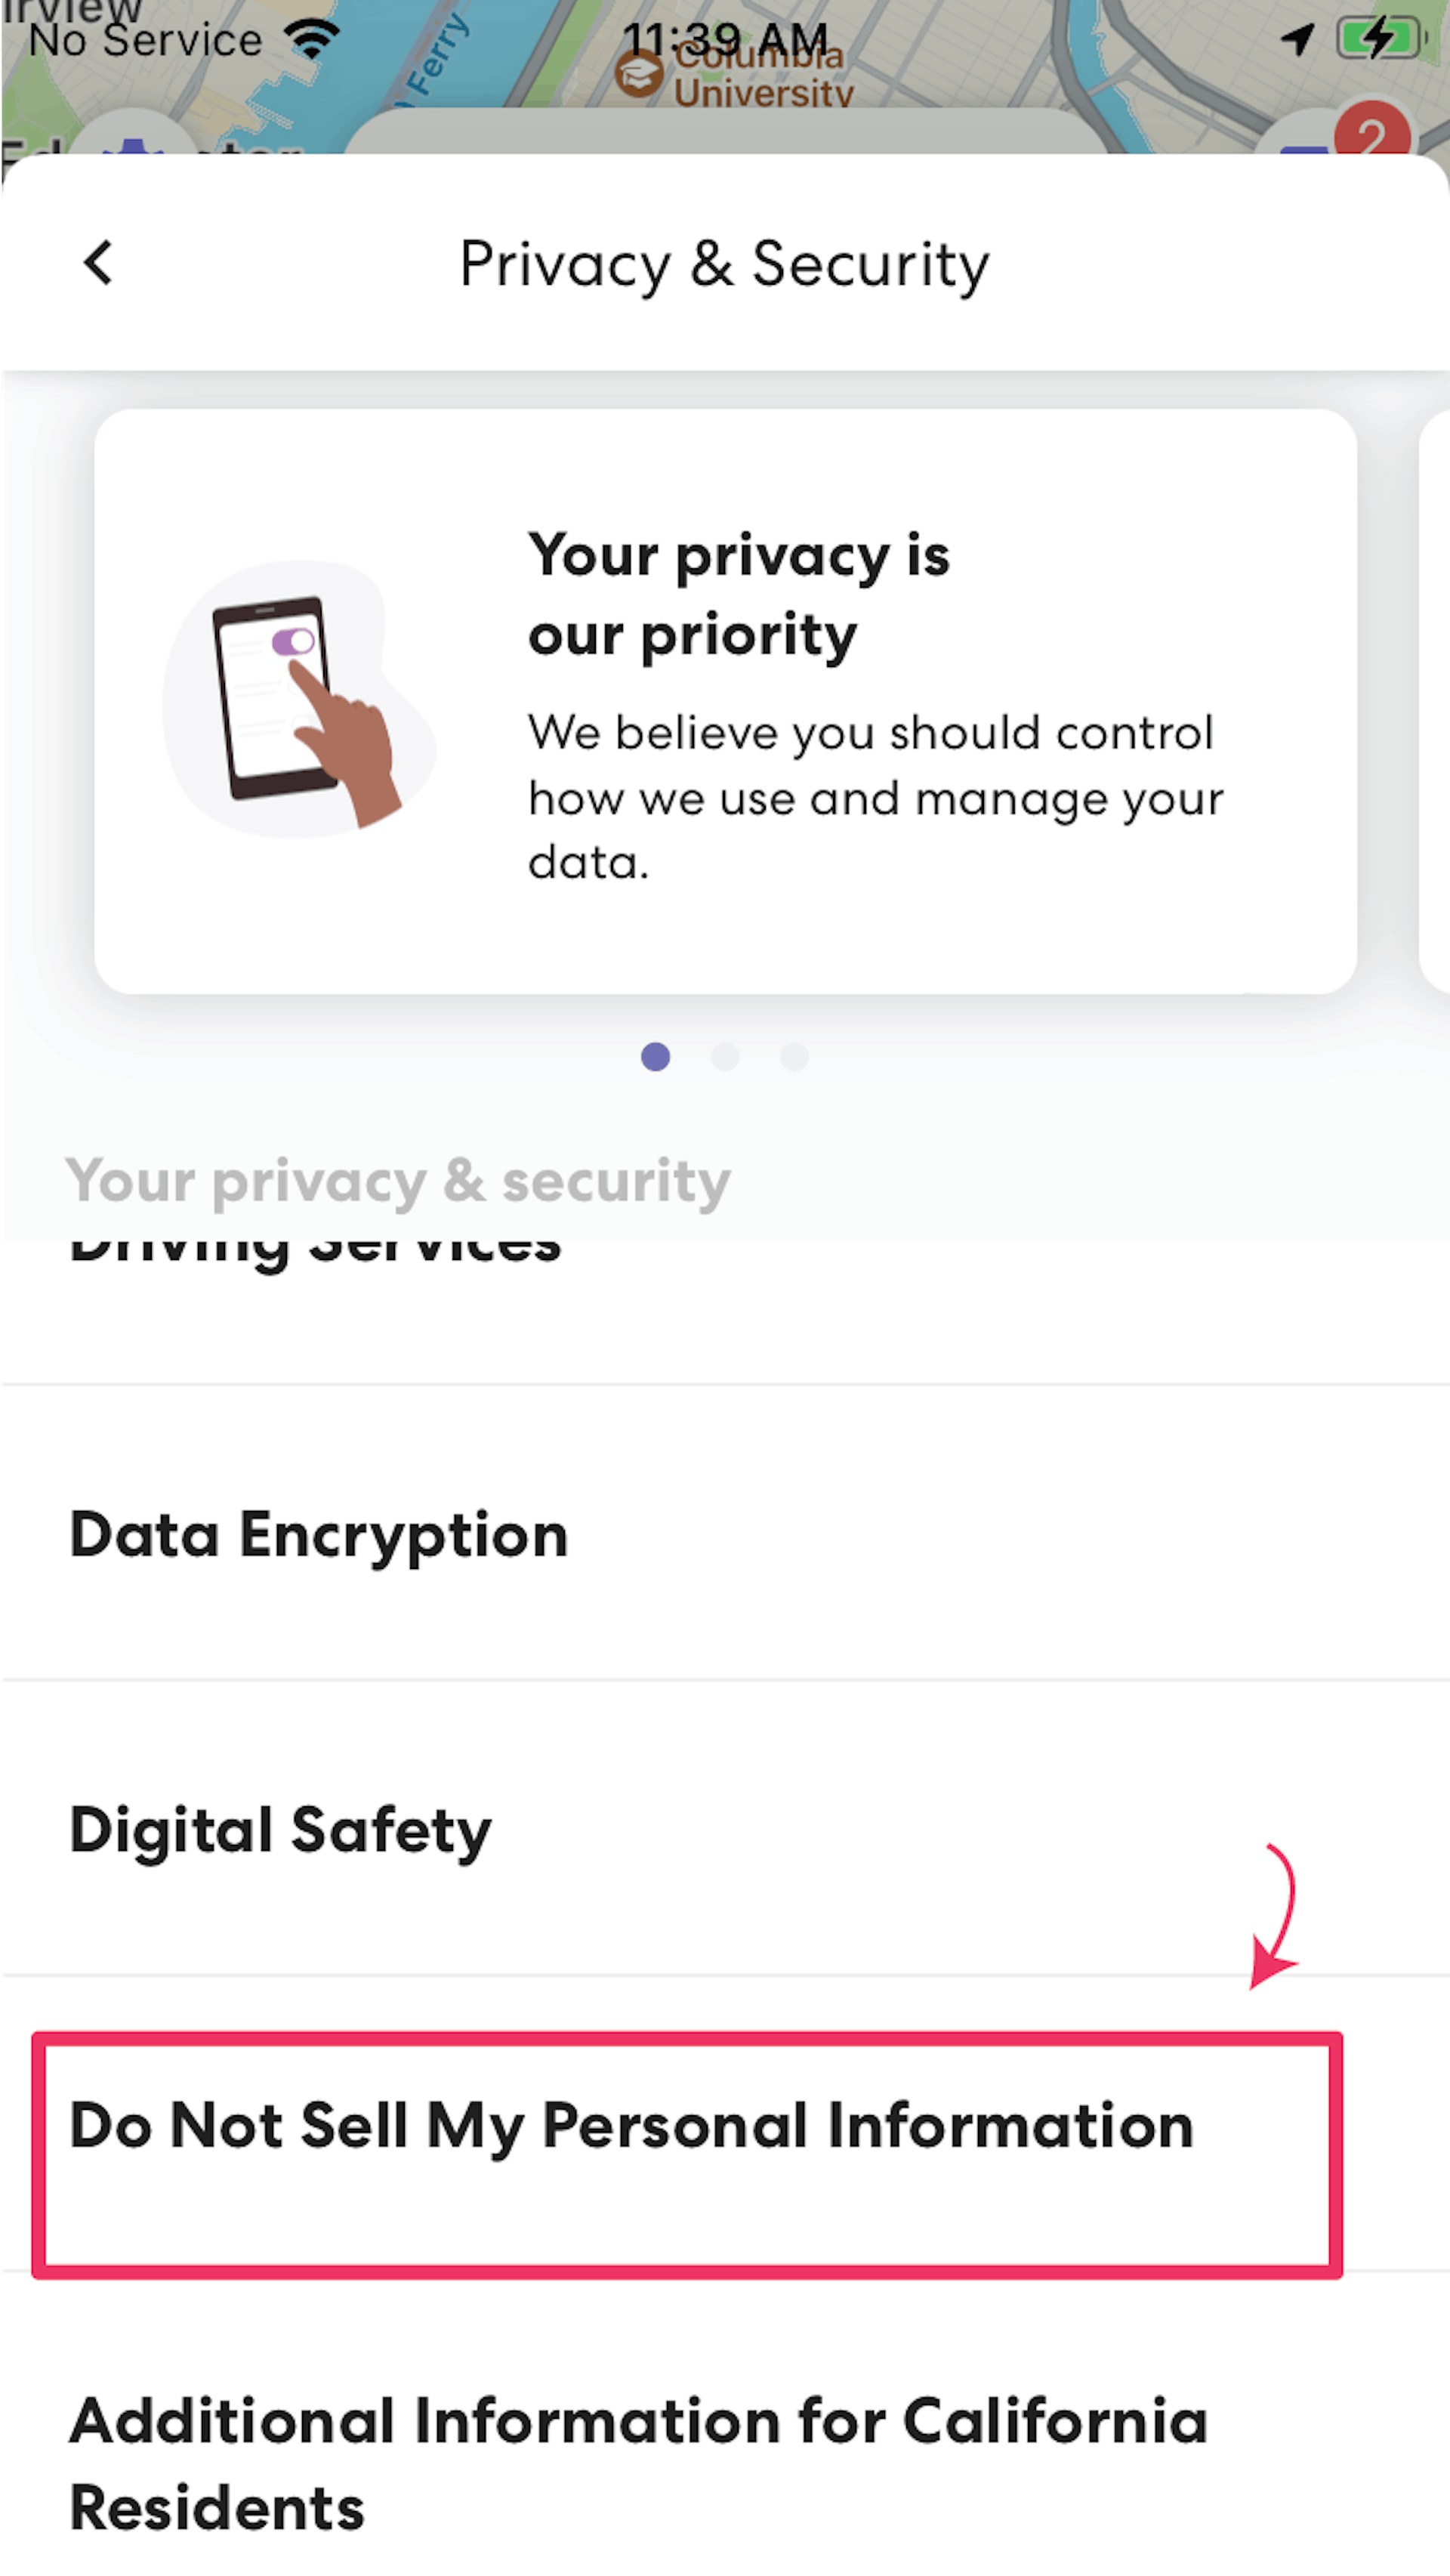 Screenshot of Life360 app highlighting the "Do Not Sell My Personal Information" button